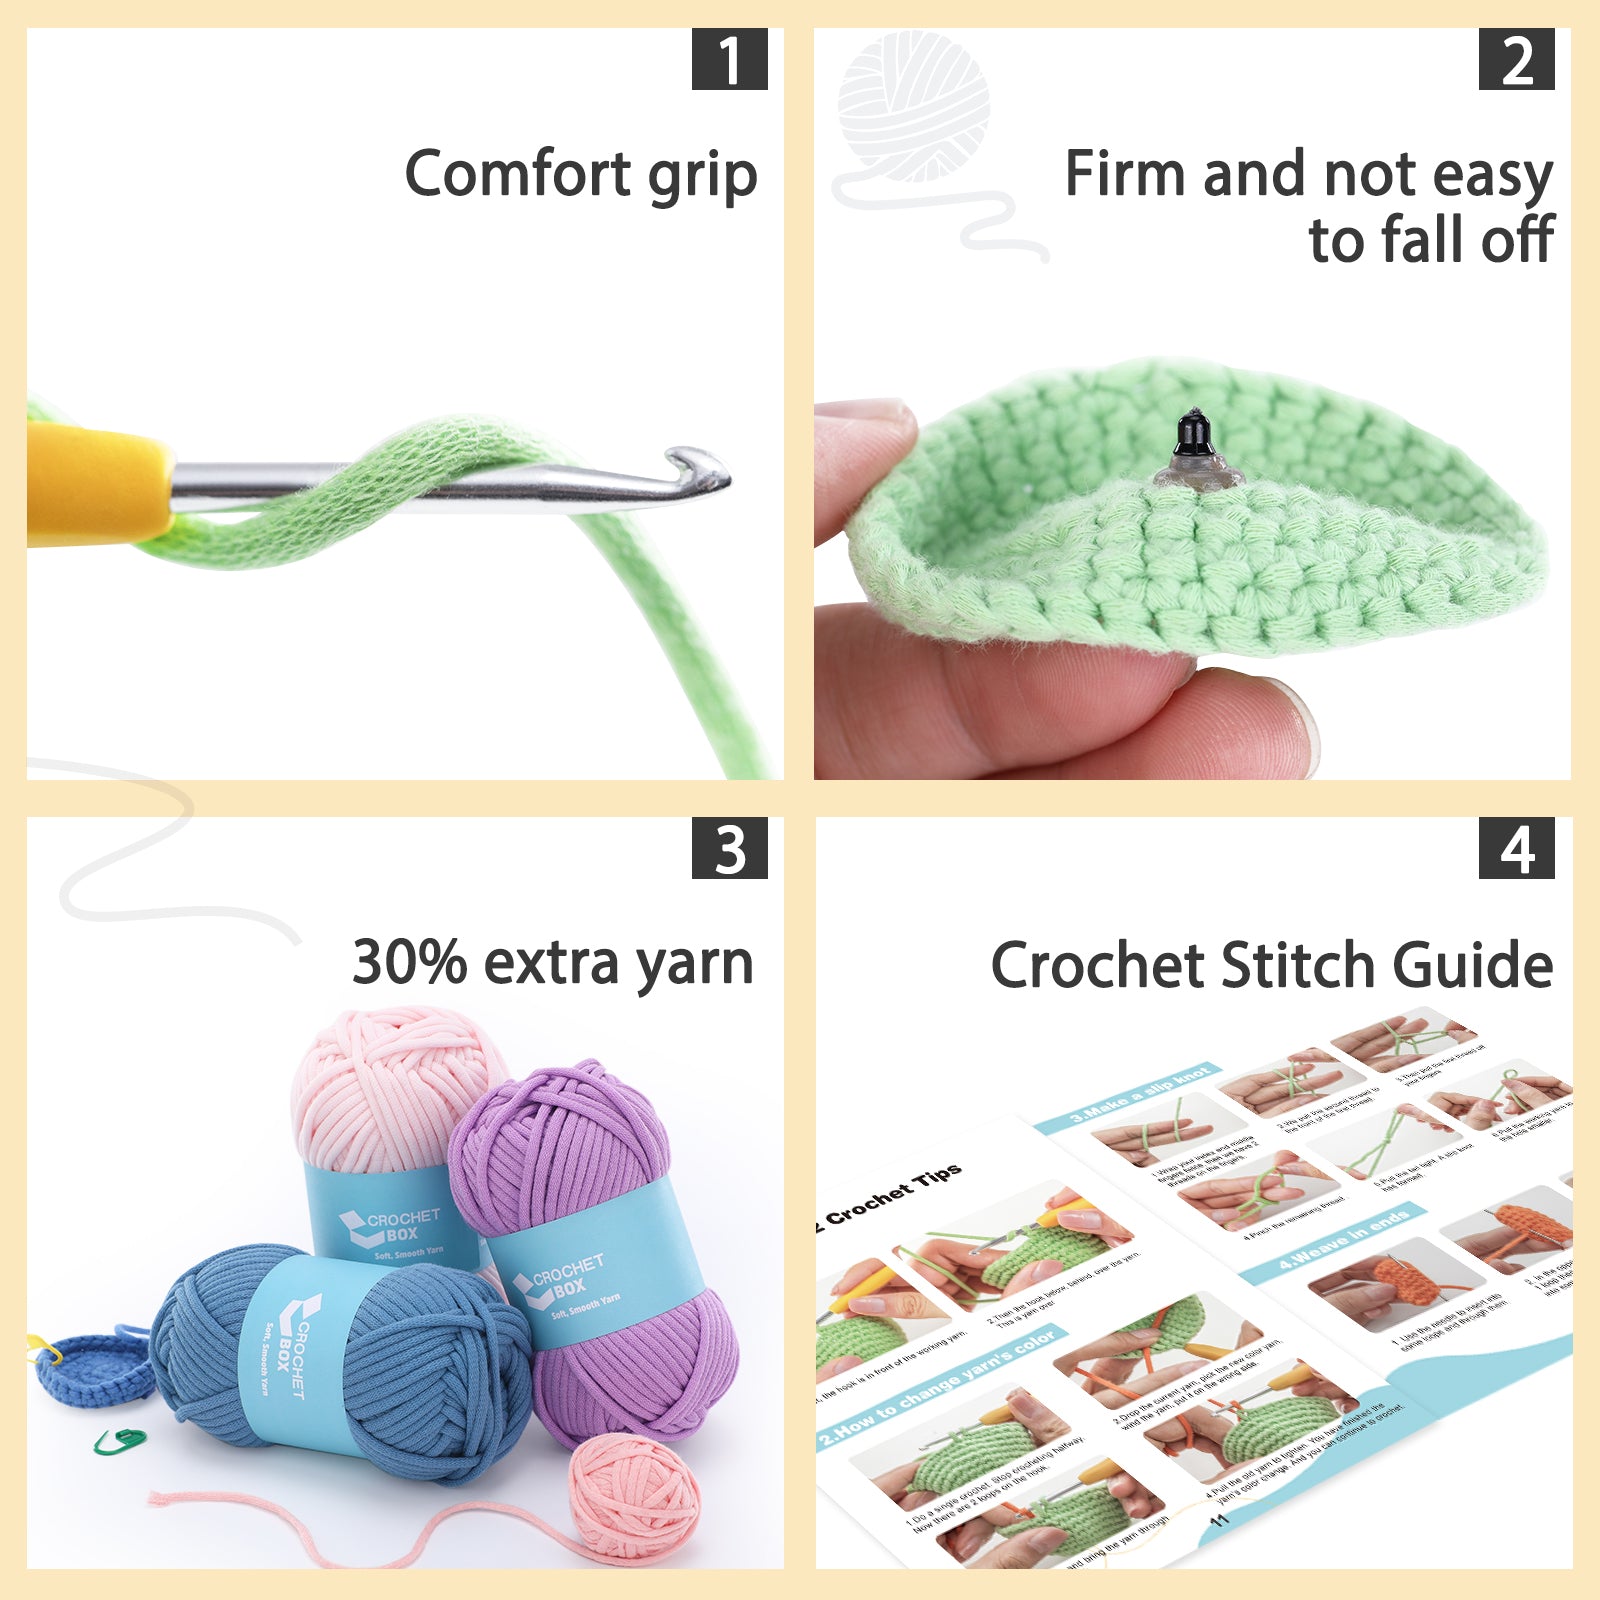 CrochetBox Crochet Kit for Beginners - Bee Crochet Kit, All You Need in, Step-by-Step Video, Instruction, Soft Yarn, Birthday Gift for Adults, Teens